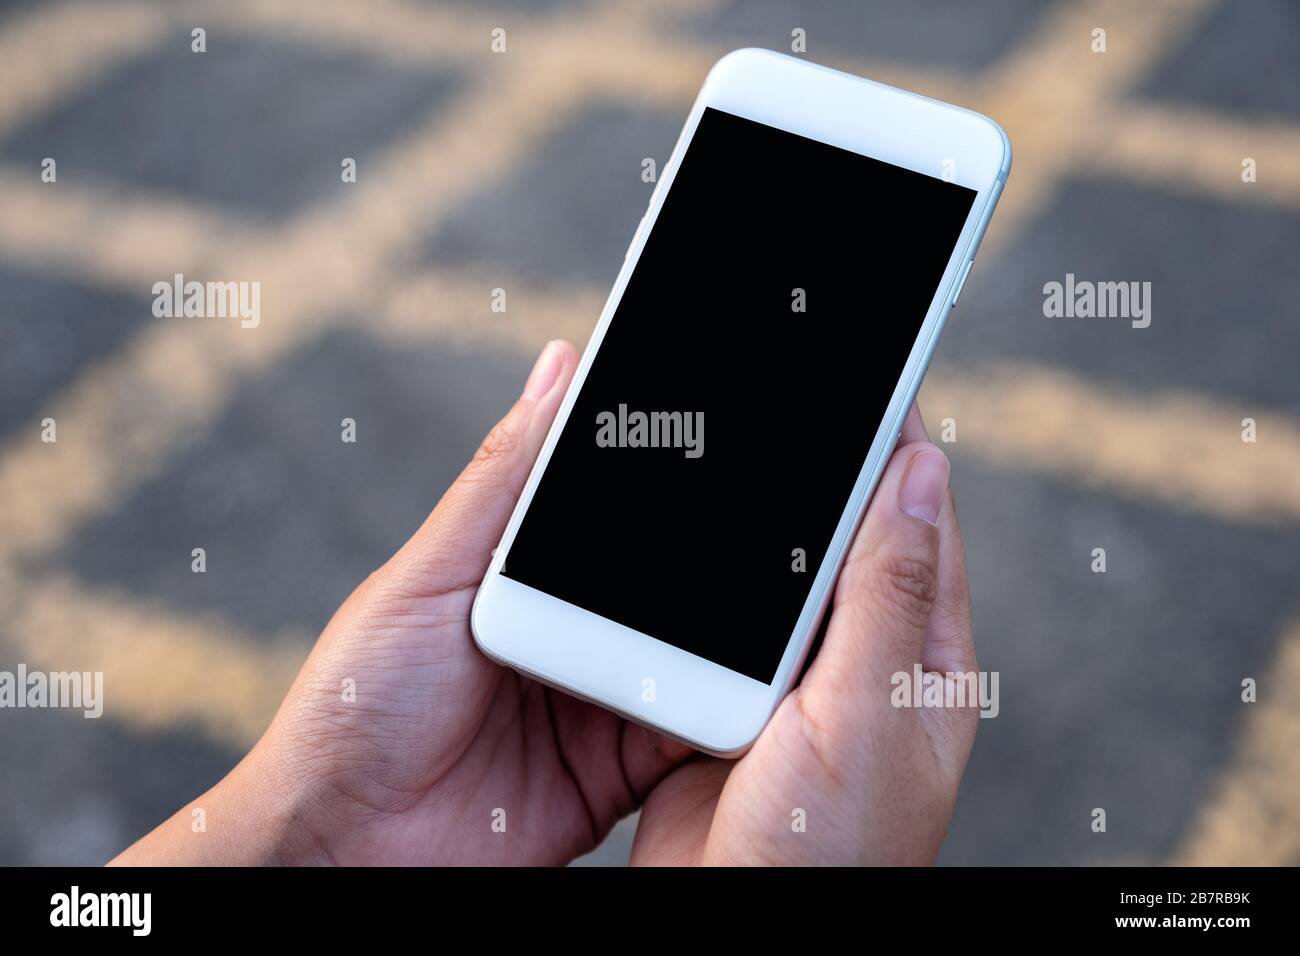 Mockup Image Of Black Hand Holding Smartphone With Blank Screen Stock Photo Alamy